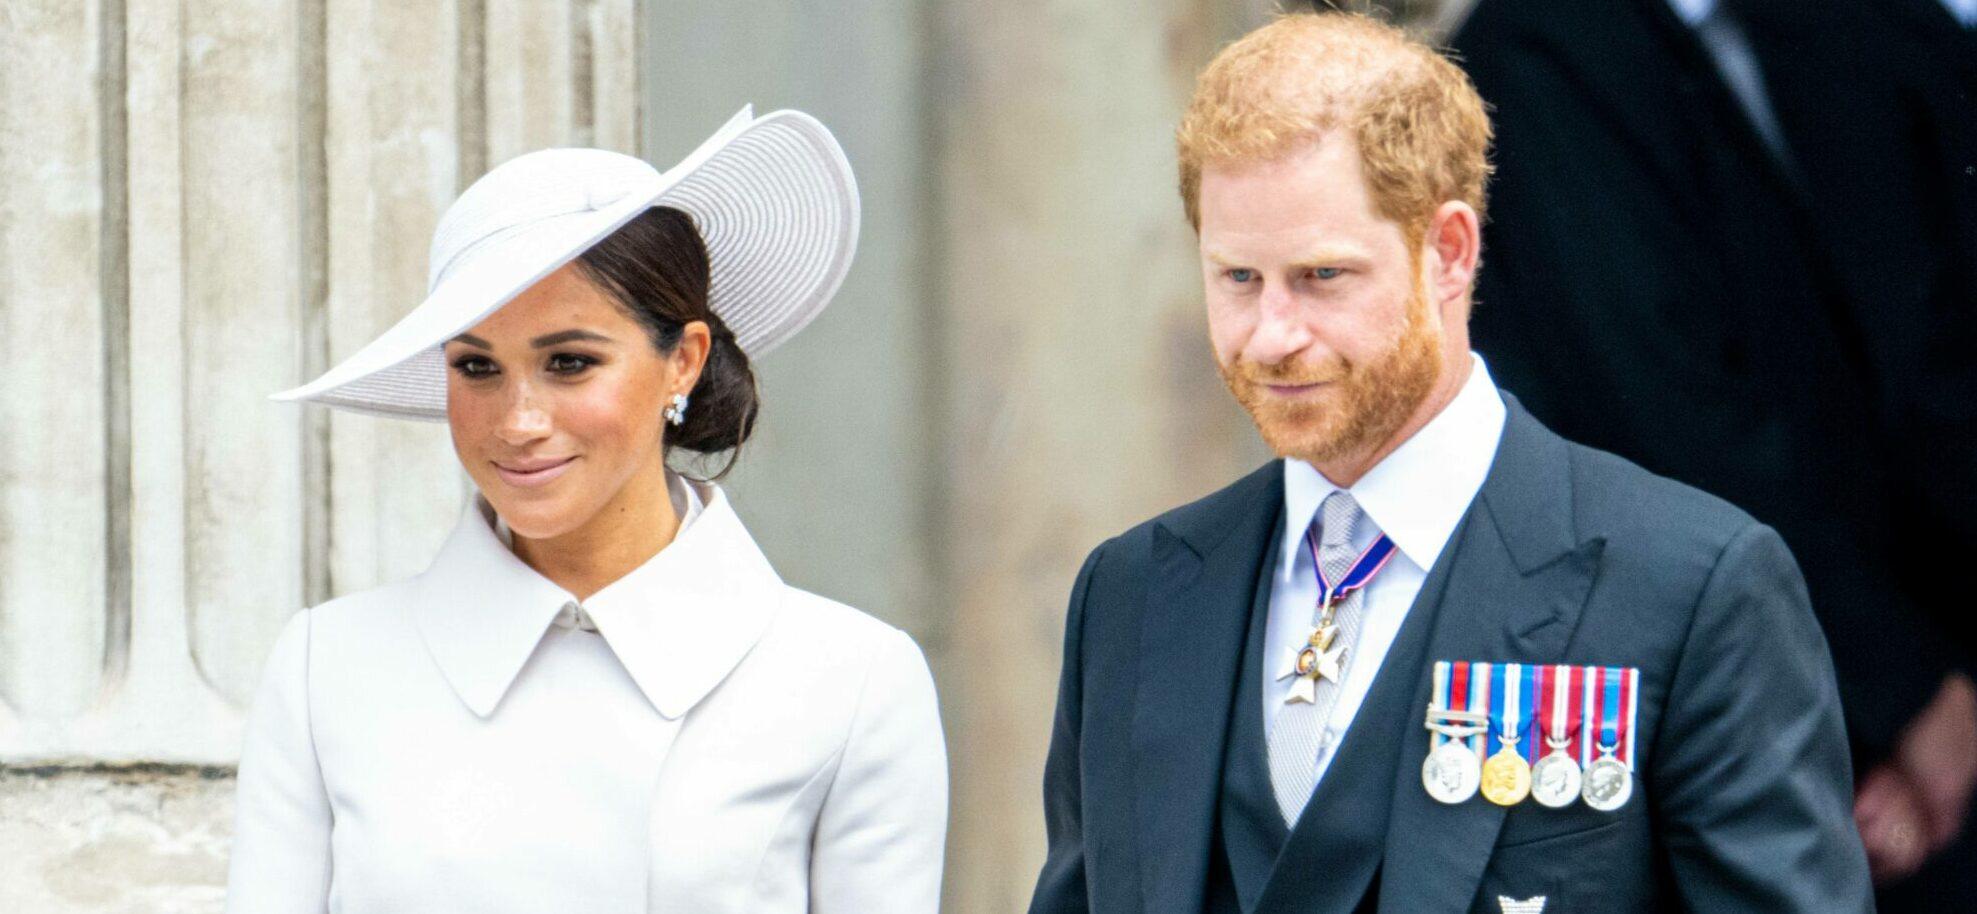 Prince Harry And Meghan Markle’s ‘Free Flights’ Around Nigeria Plagued By Money Laundering Scandal